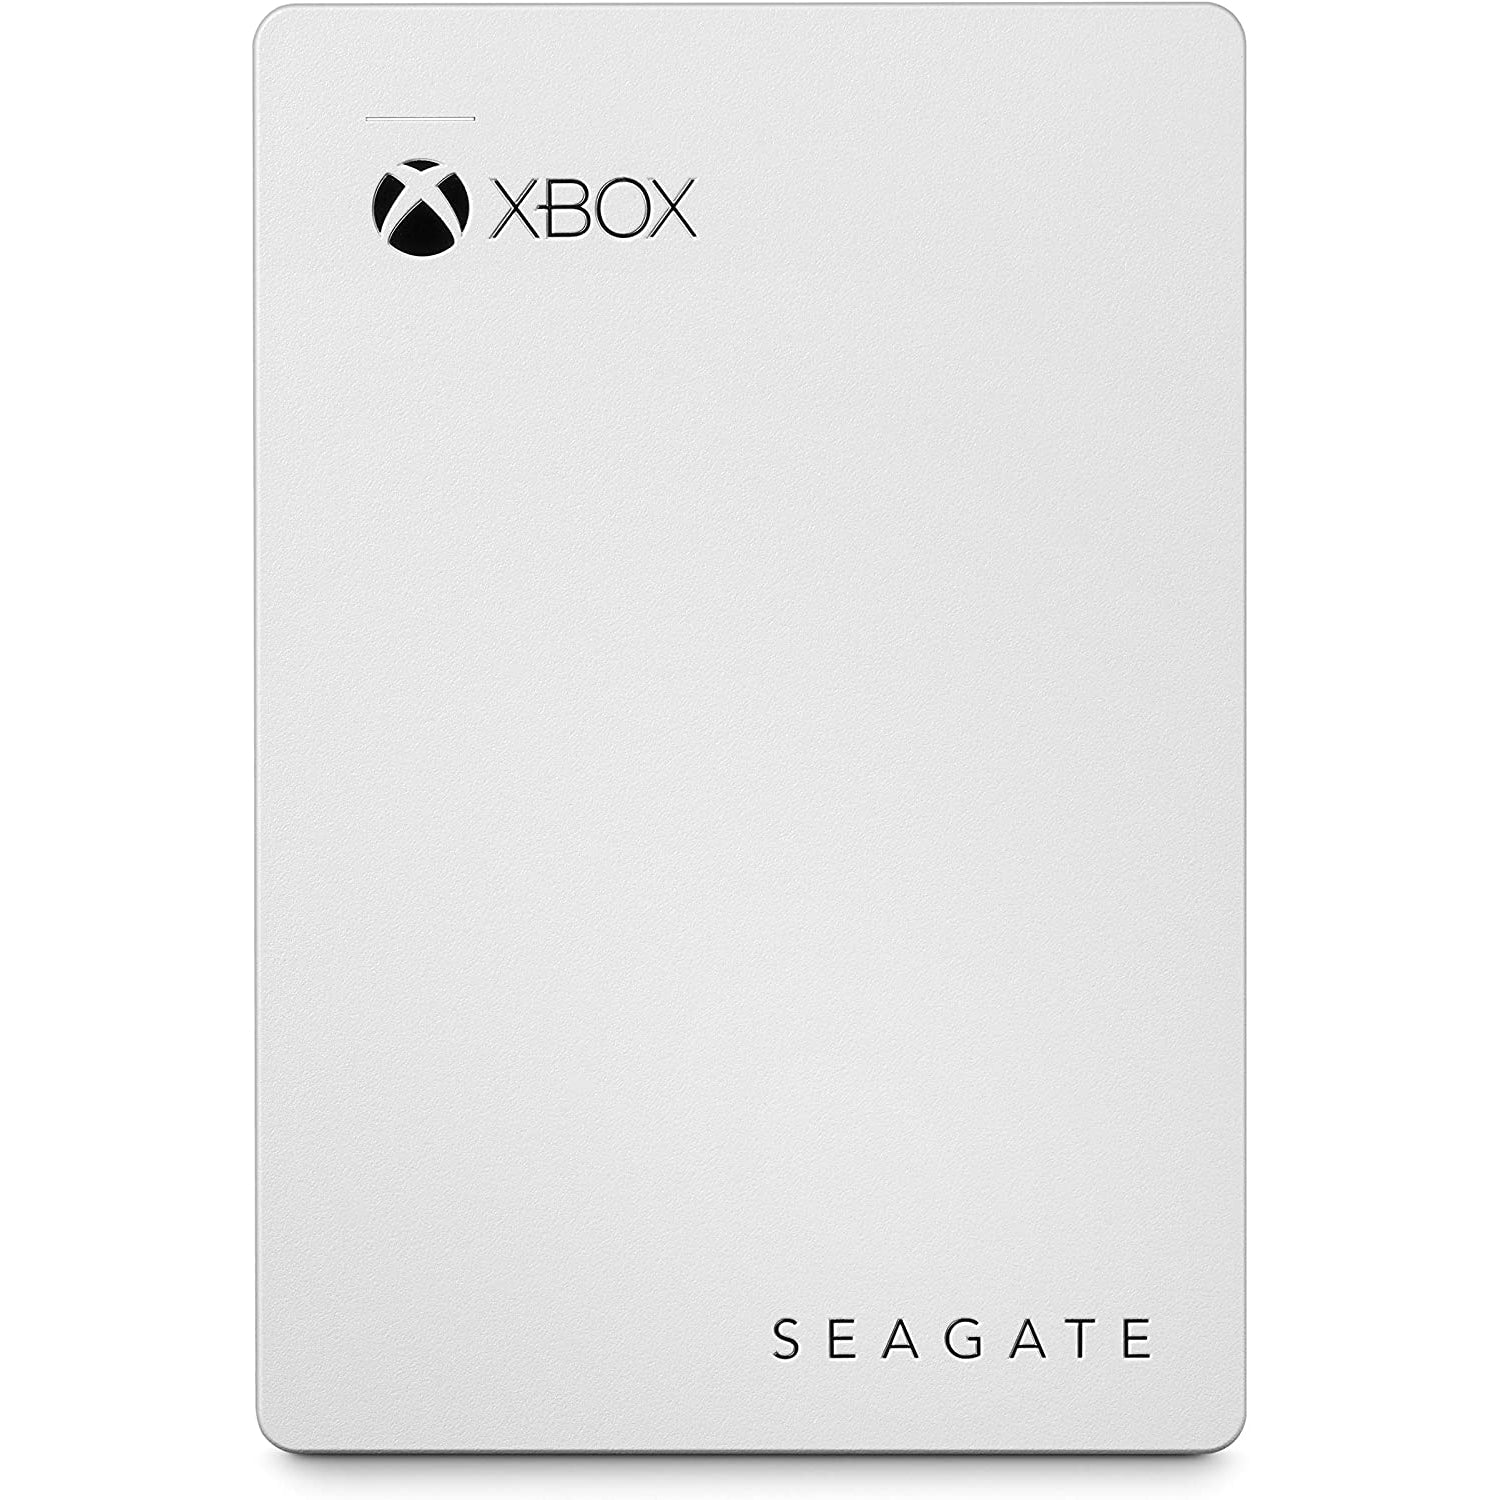 Seagate Game Drive for Xbox, 2 TB, External Hard Drive Portable HDD, Designed for Xbox One